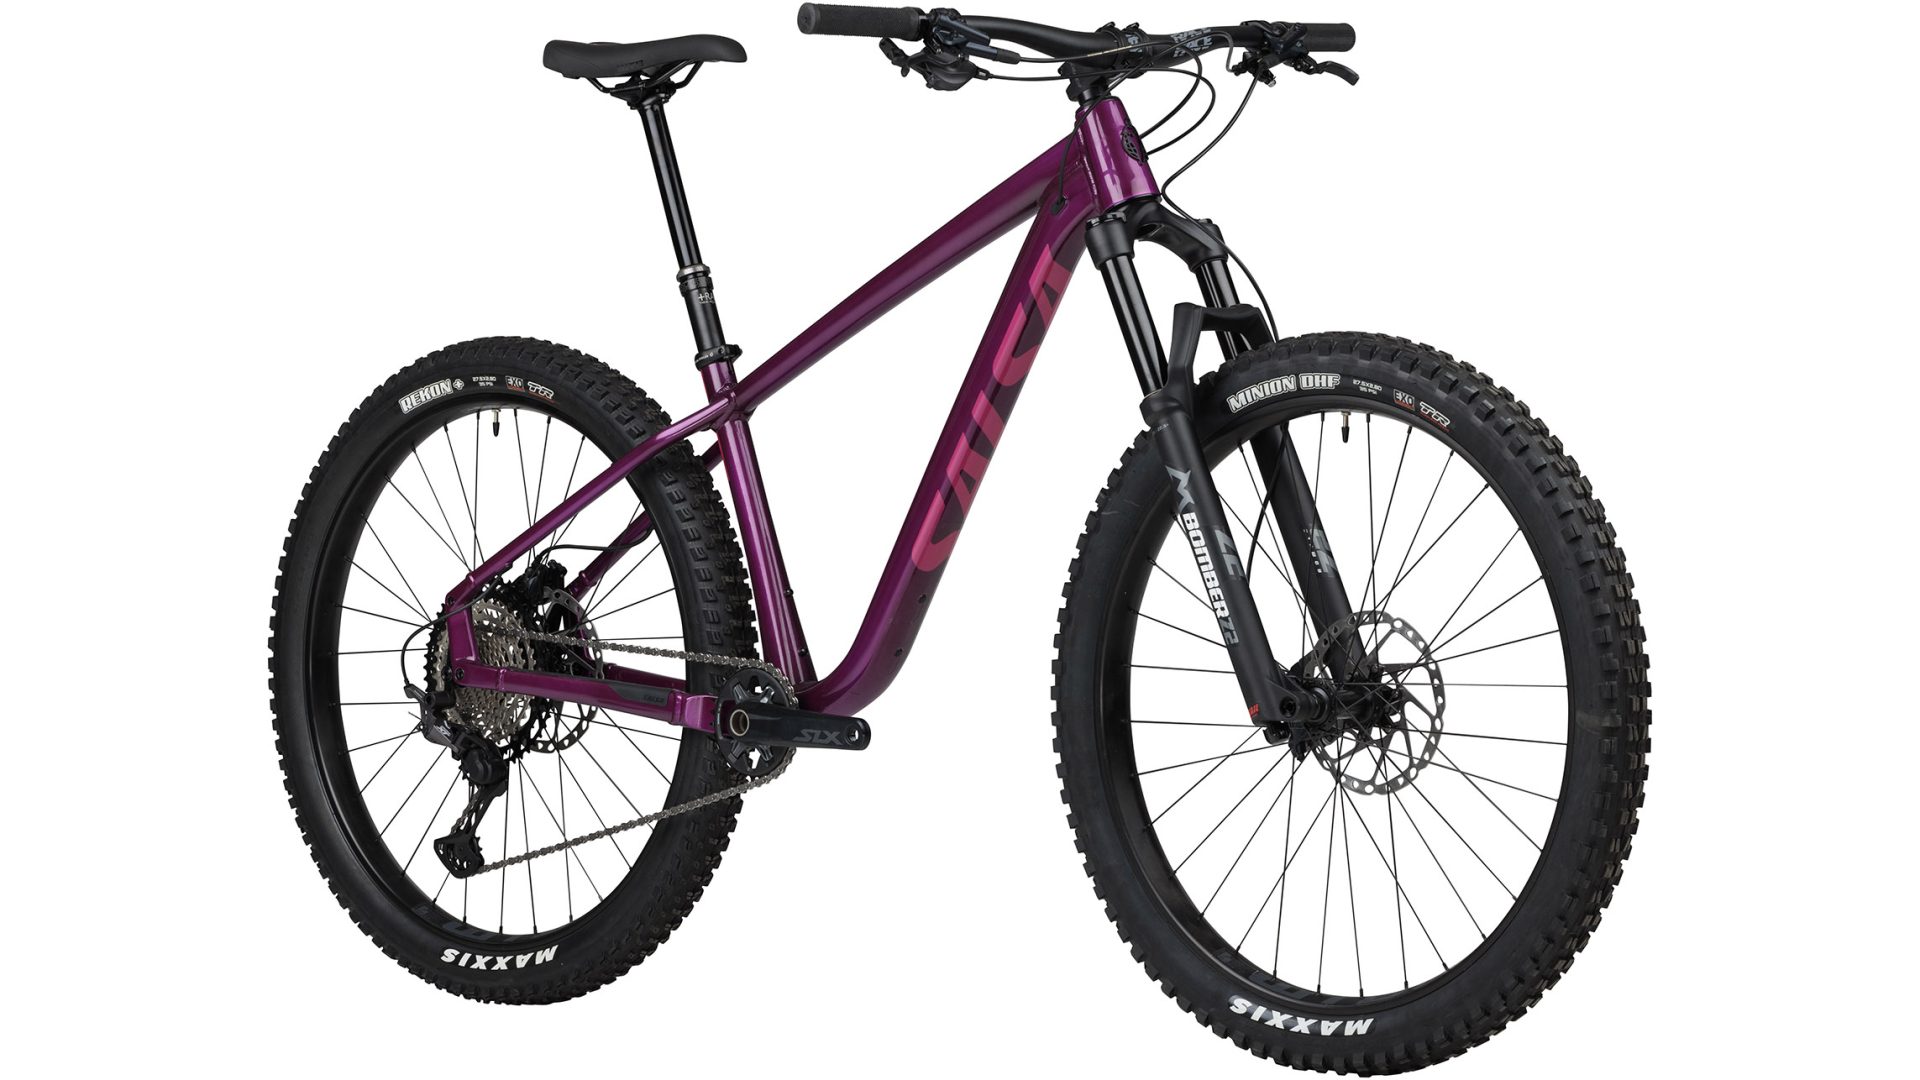 Salsa Timberjack Lands New Specs and Colorways for 2023